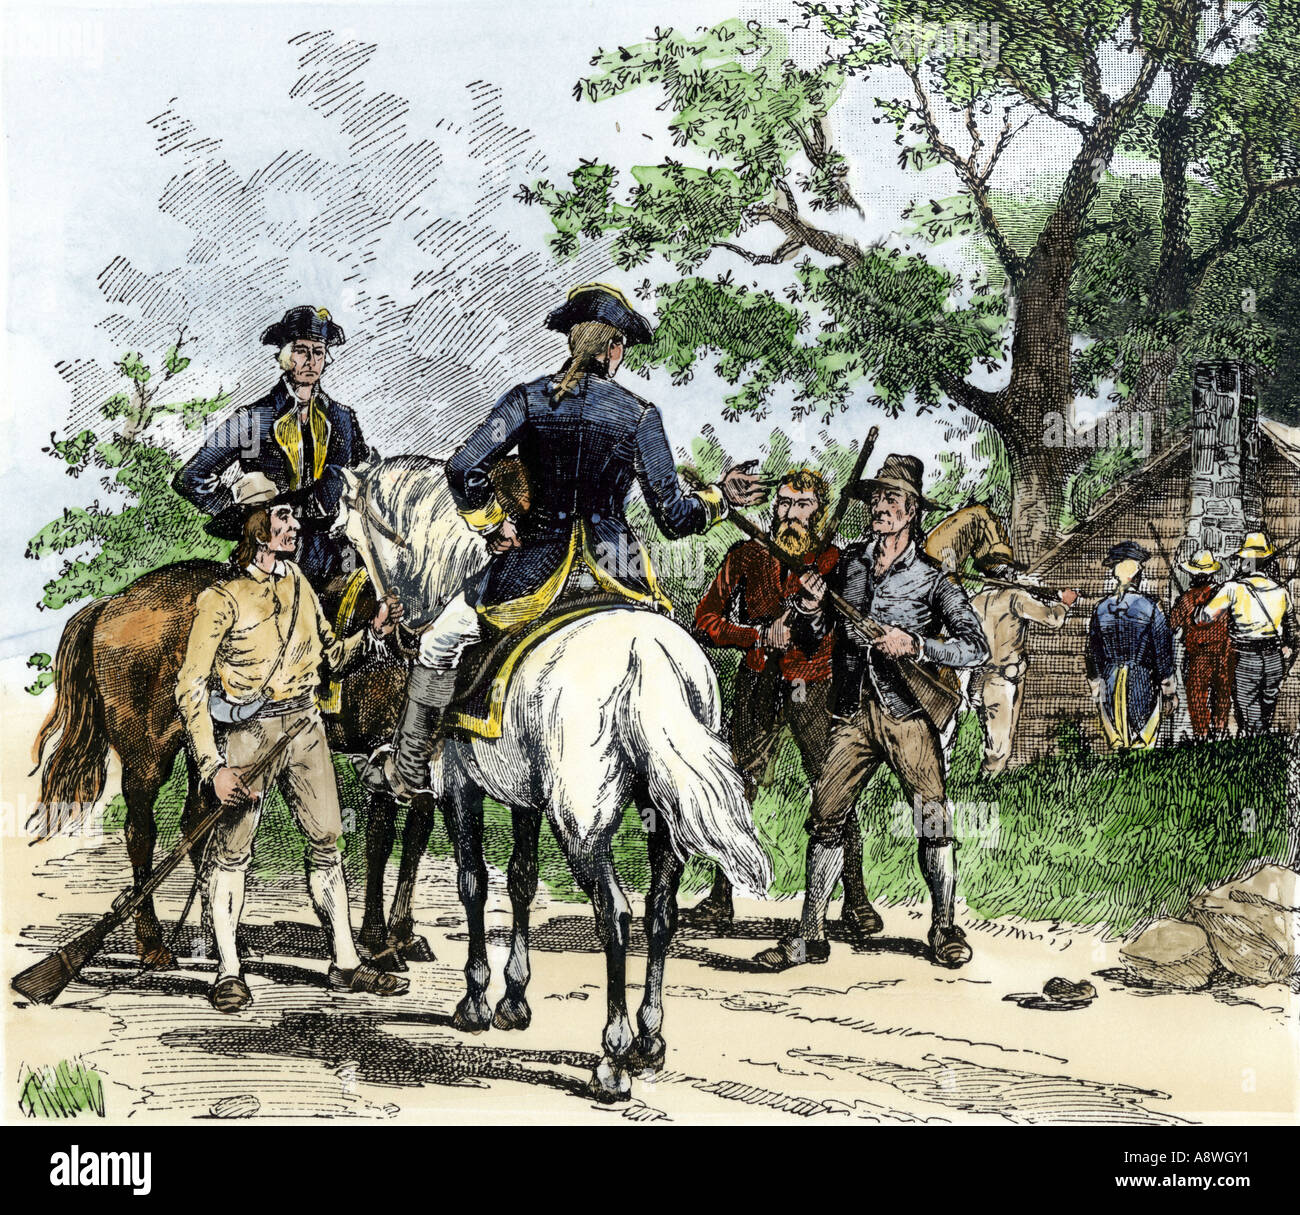 Angry citizens capturing tax collectors during the Whiskey Rebellion after the new federal government was formed 1790s. Hand-colored woodcut Stock Photo